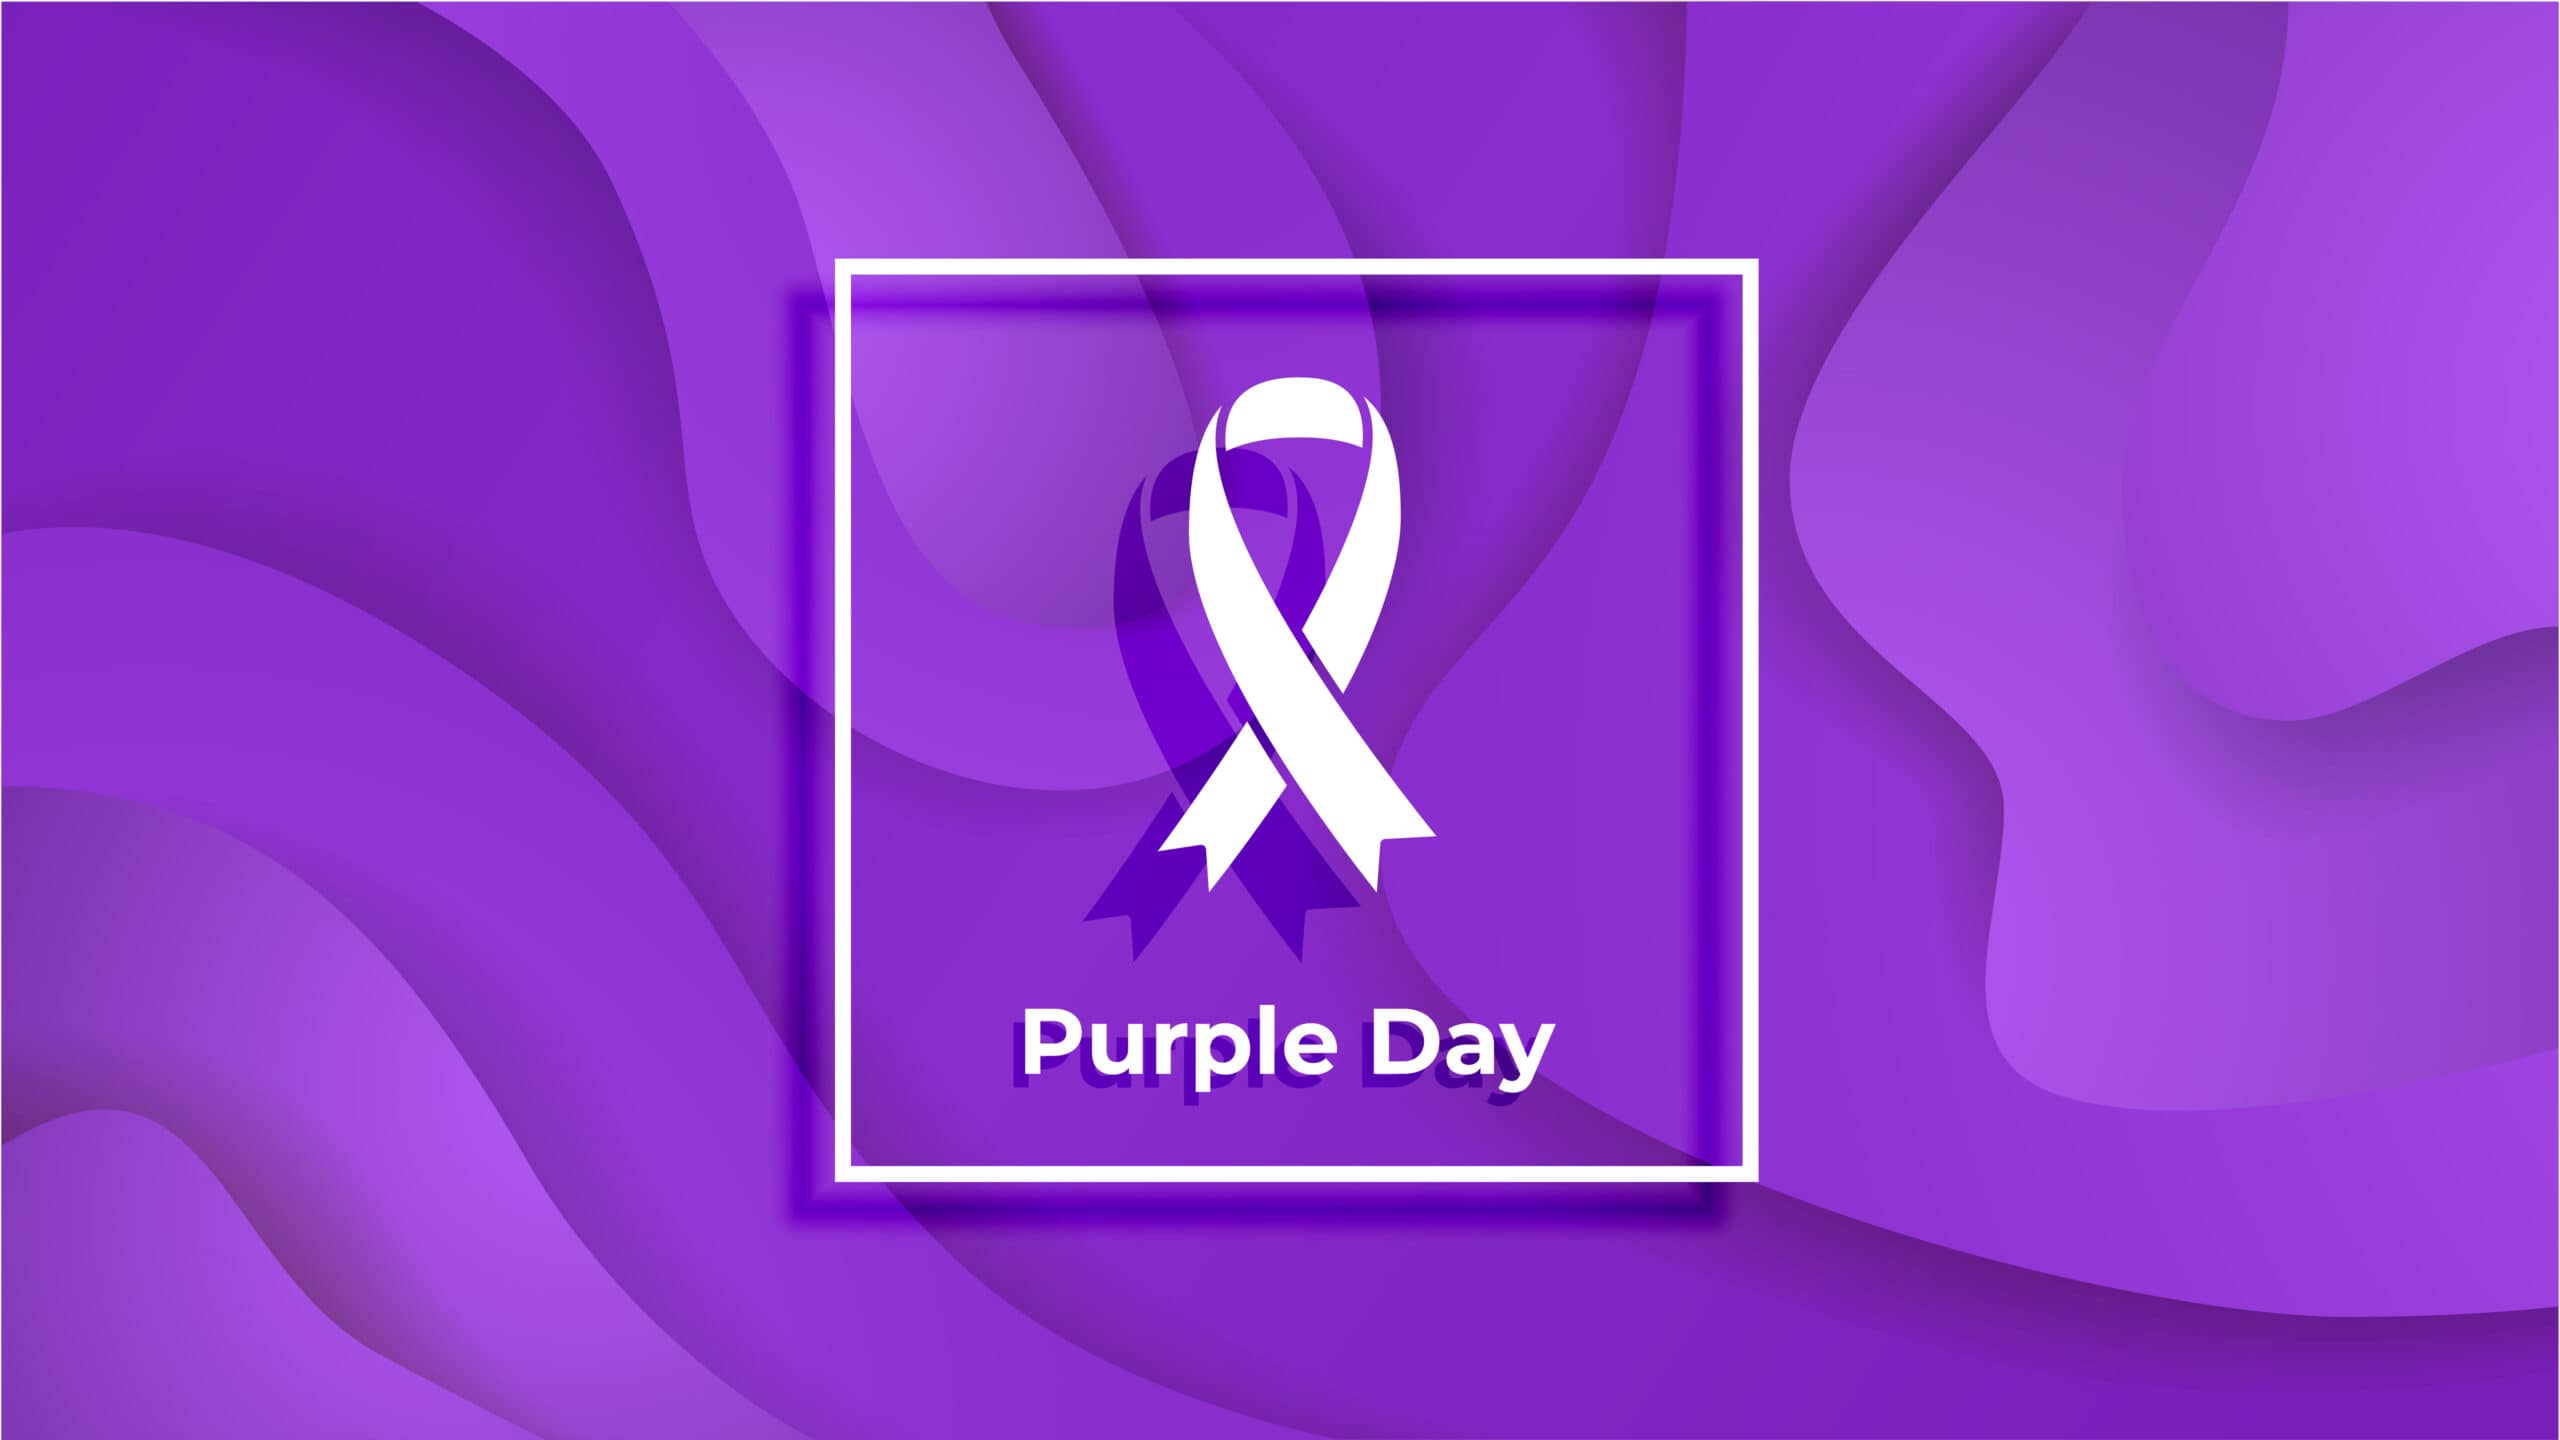 This Friday, March 26th, Let's Celebrate Purple Day! ⋆ SaintBernard